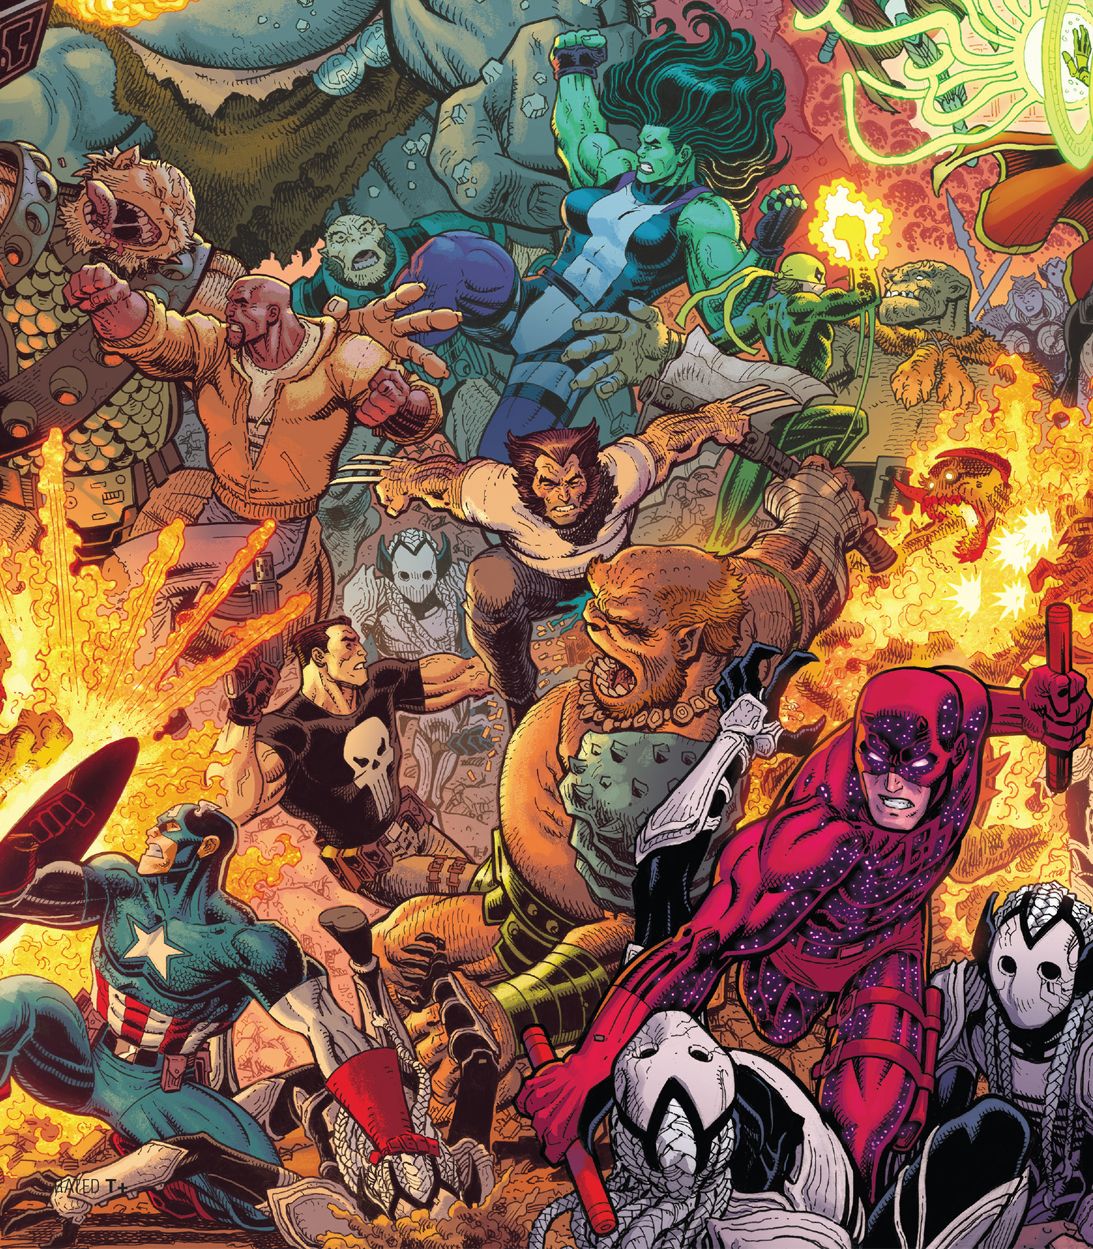 Marvel War of the Realms #1 by Art Adams